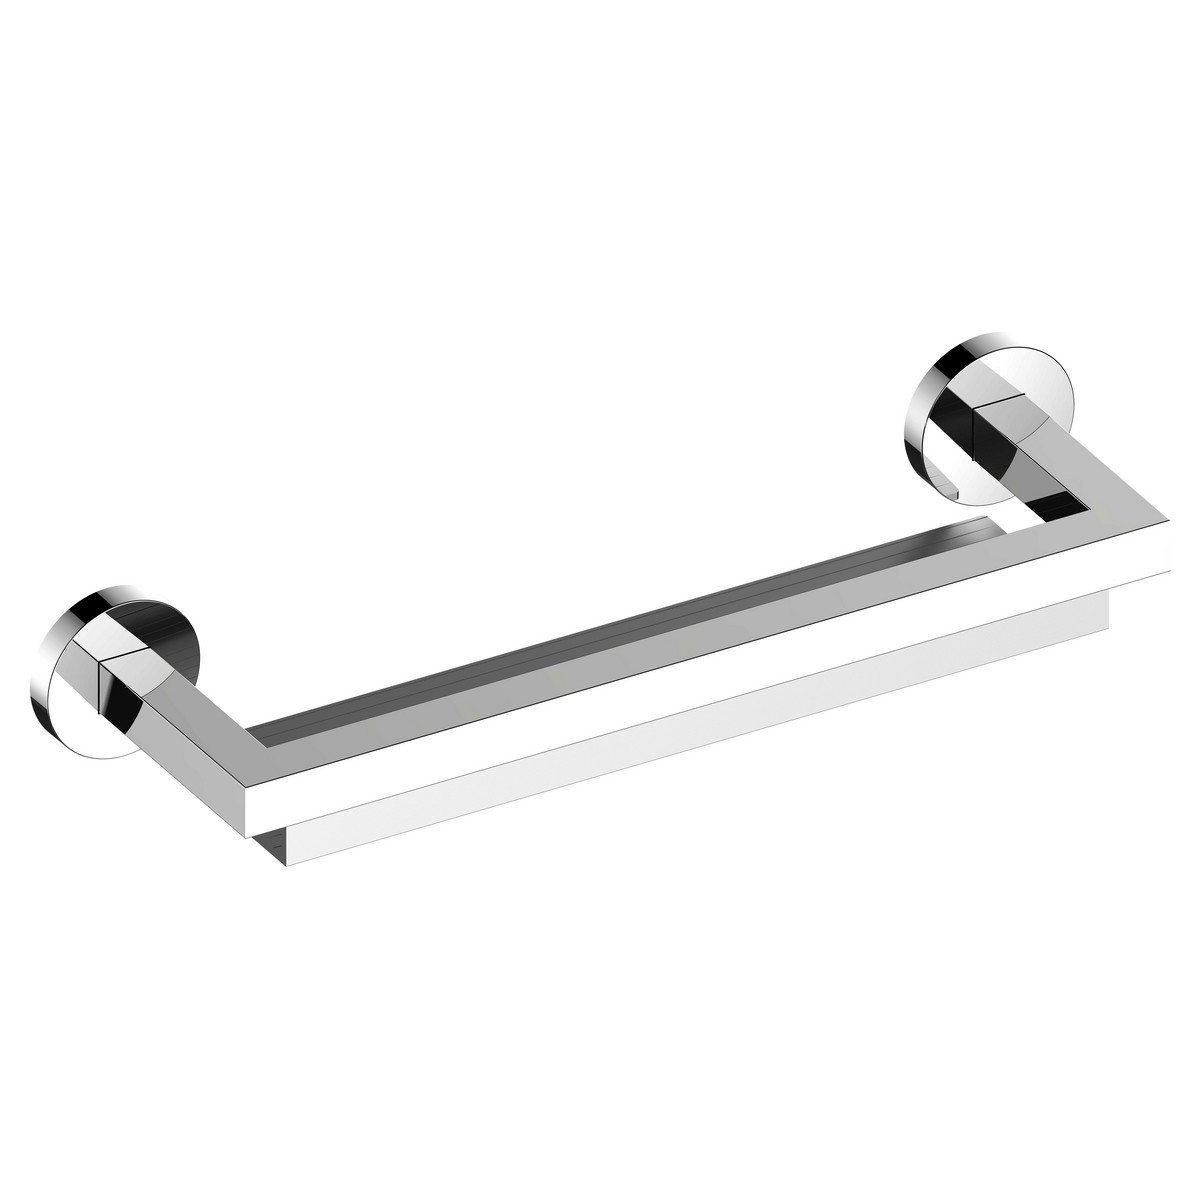 KEUCO 19058010000 EDITION 90 15 3/4 INCH WALL MOUNTED SHOWER SHELF IN POLISHED CHROME AND ALUMINUM